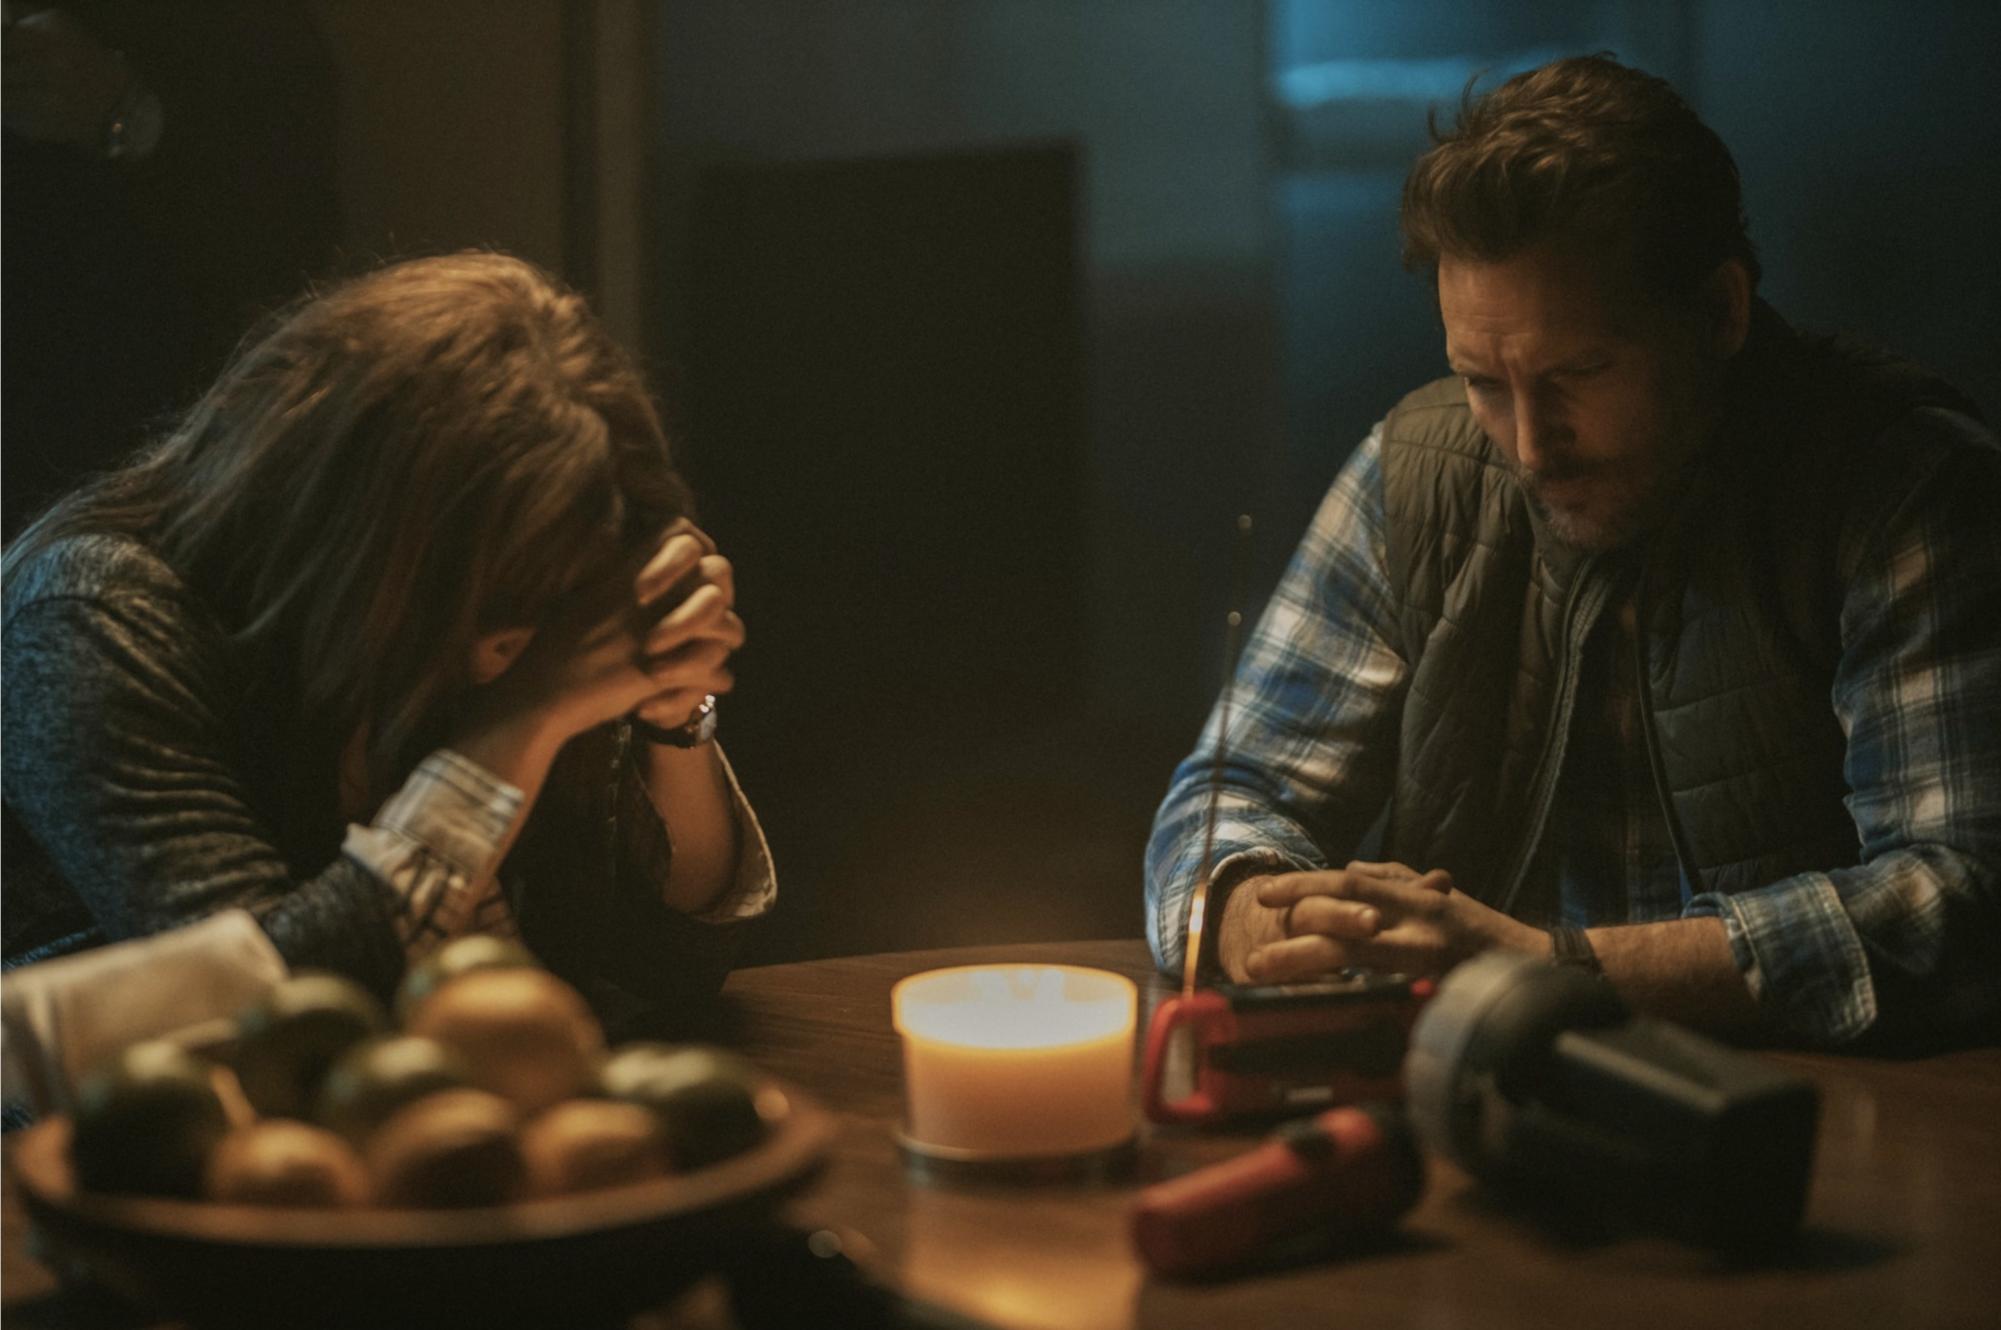 Dave Laughlin, portrayed by Peter Facinelli, and Sarah Laughlin, portrayed by Fiona Dourif, sitting at a table listening to the news on the radio talking about the ongoing forest fire around their location.